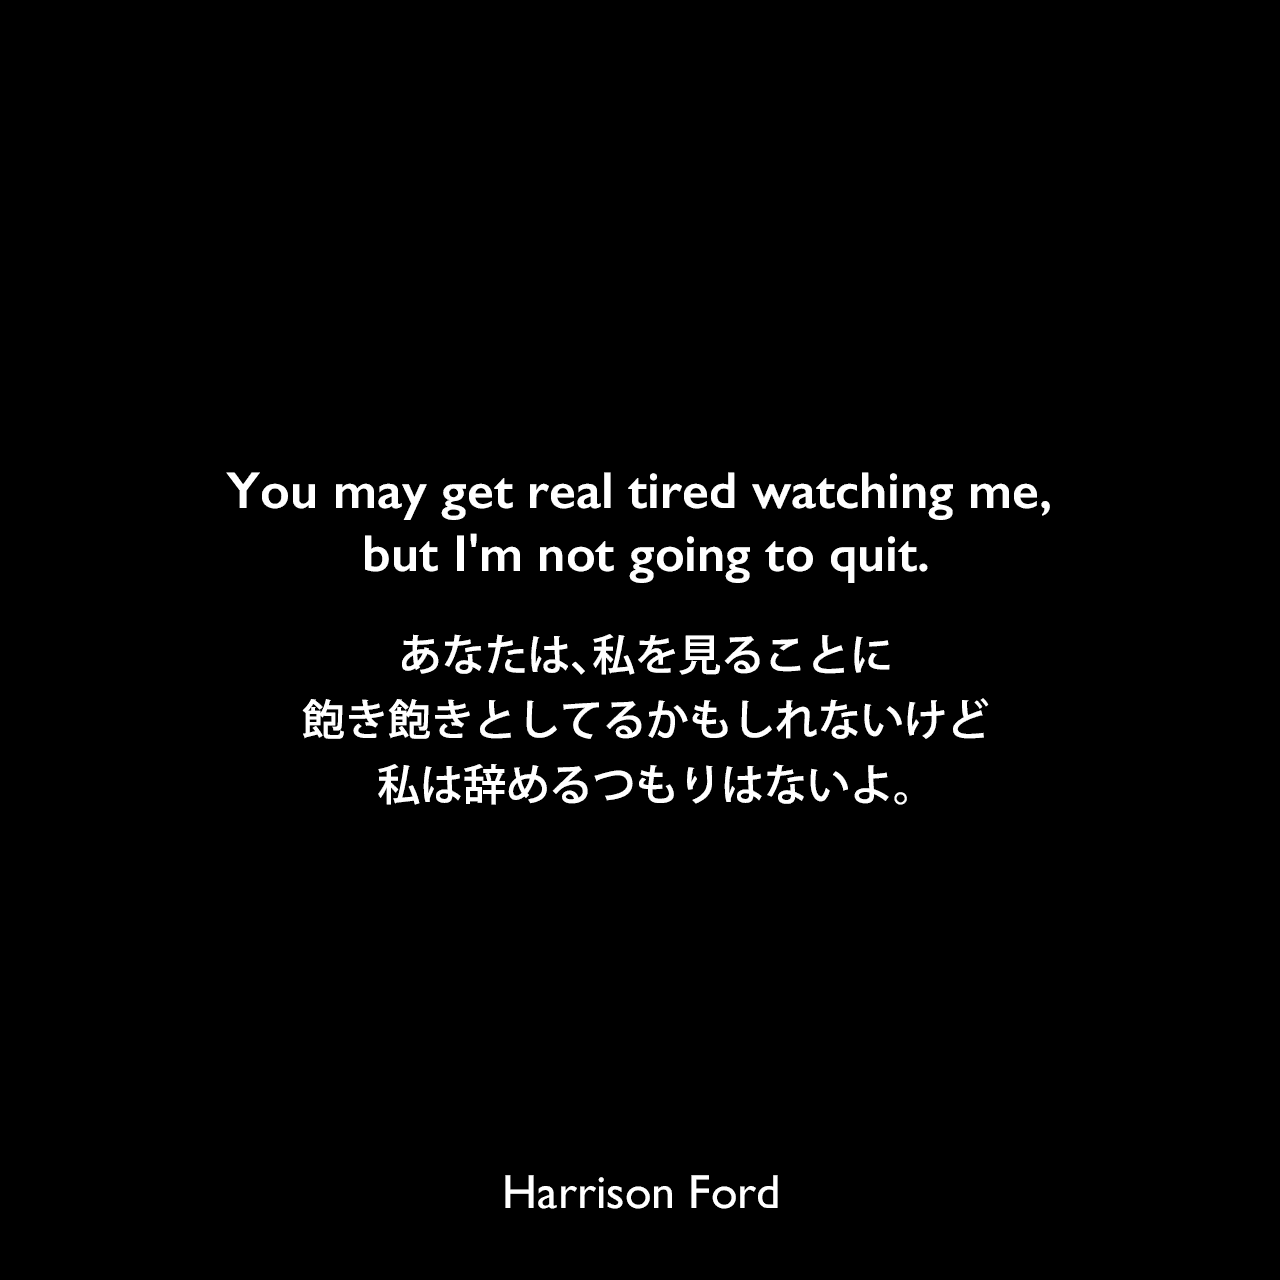 You may get real tired watching me, but I'm not going to quit.あなたは、私を見ることに飽き飽きとしてるかもしれないけど、私は辞めるつもりはないよ。Harrison Ford